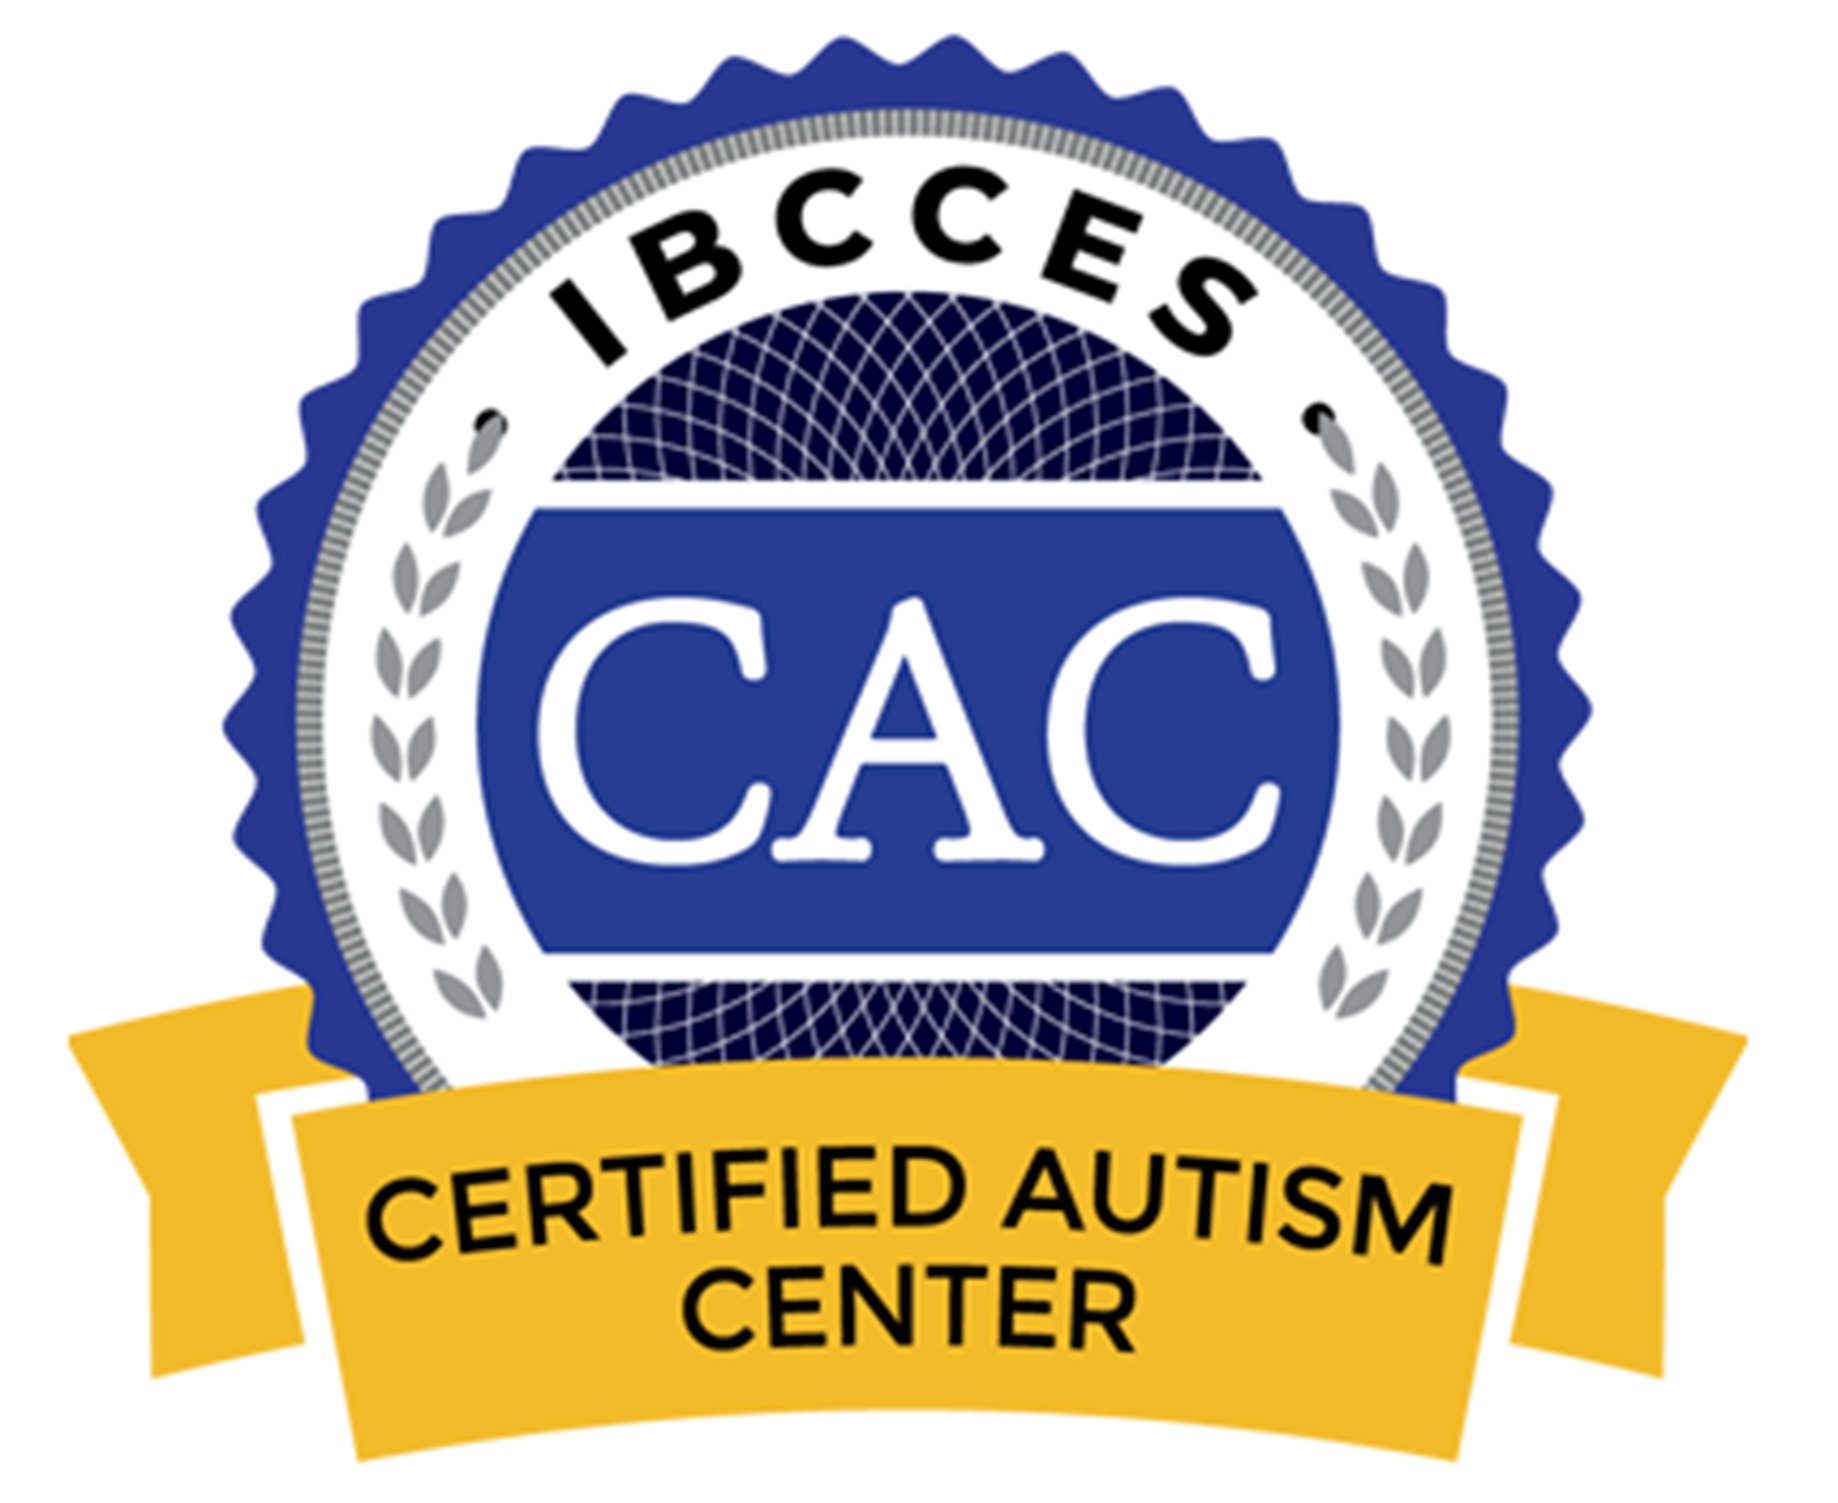 Certified Autism Center Large